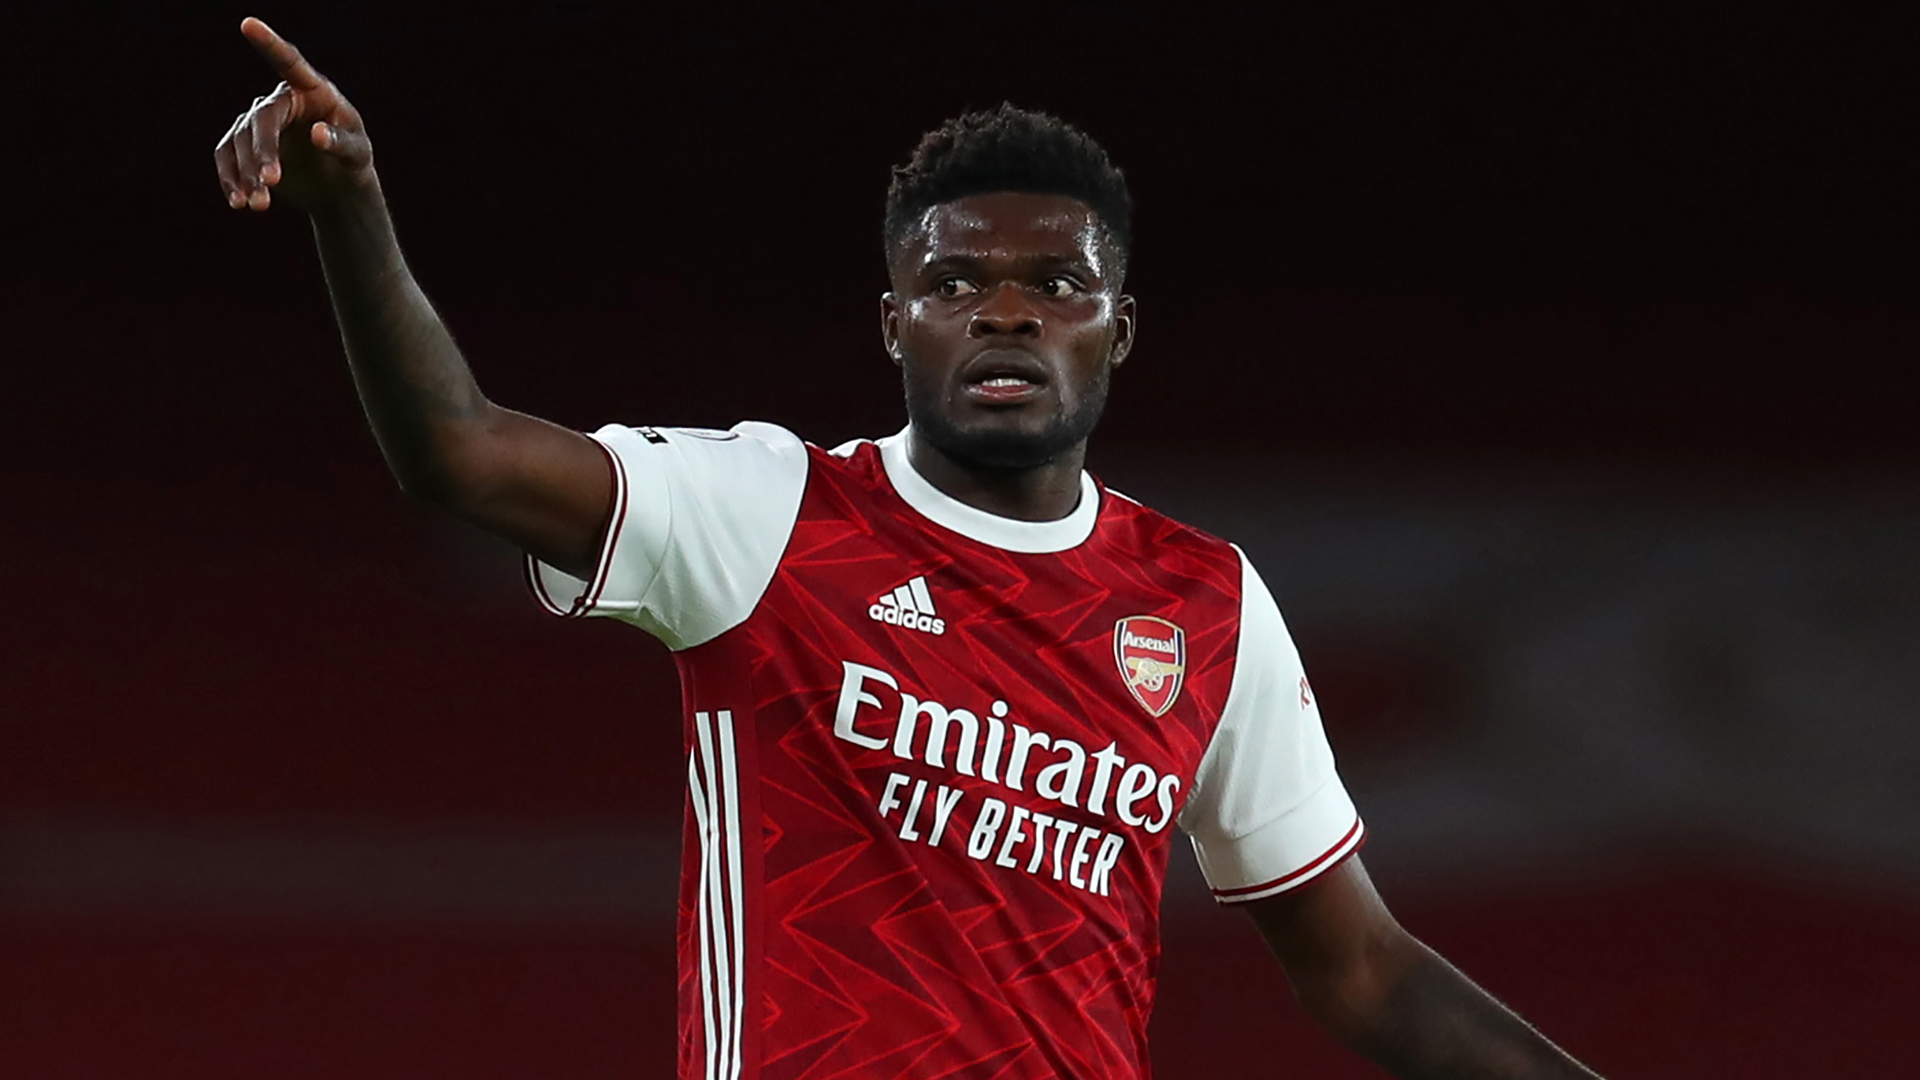 Thomas Partey: What to expect in 2021? | Goal.com